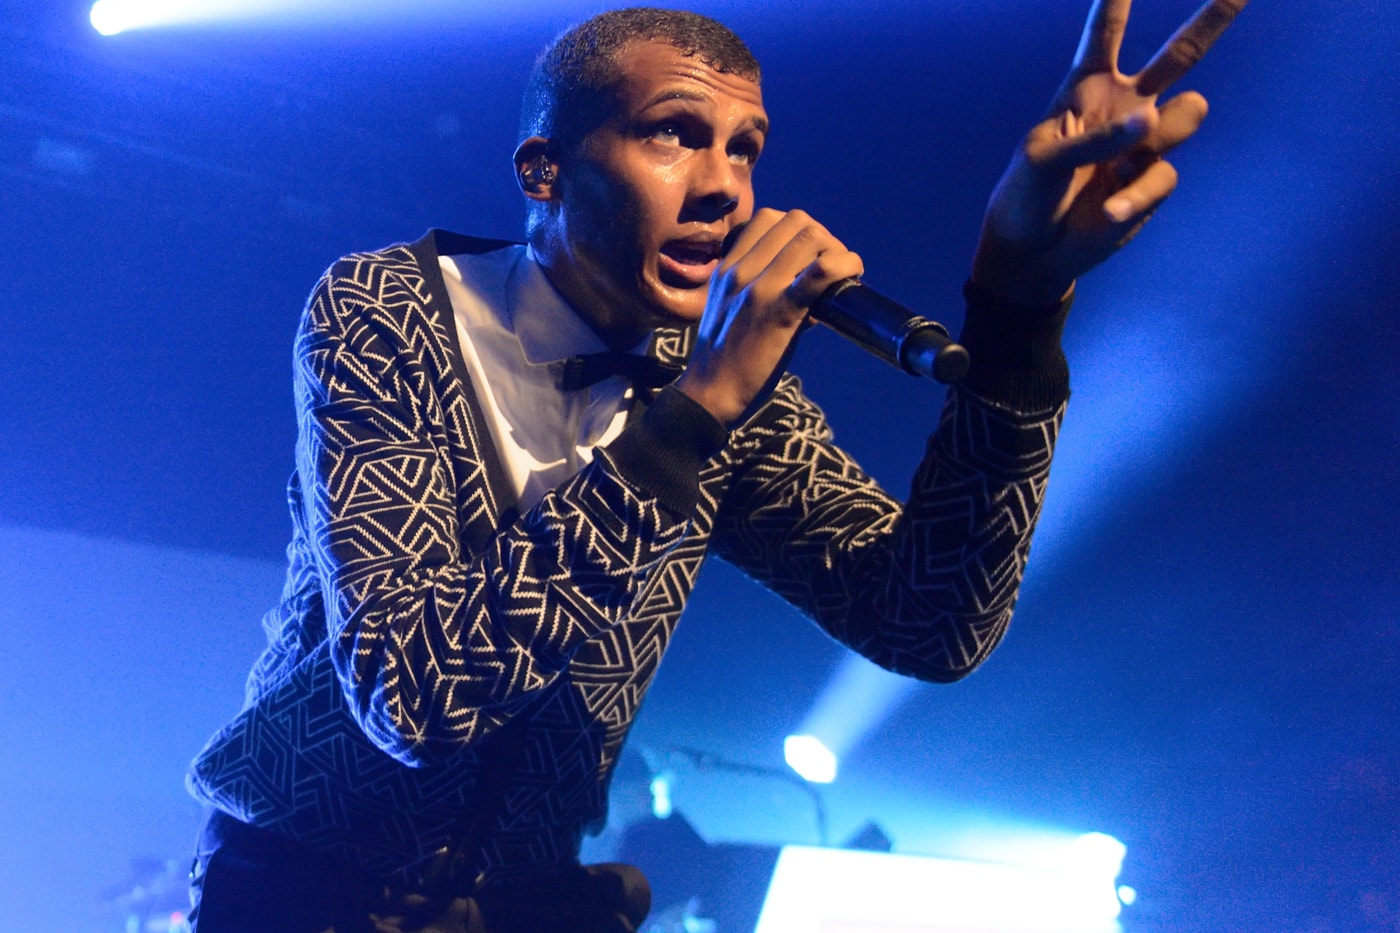 Stromae featuring Kanye West & Gilbere Forte' - Alors On Danse (Remix)